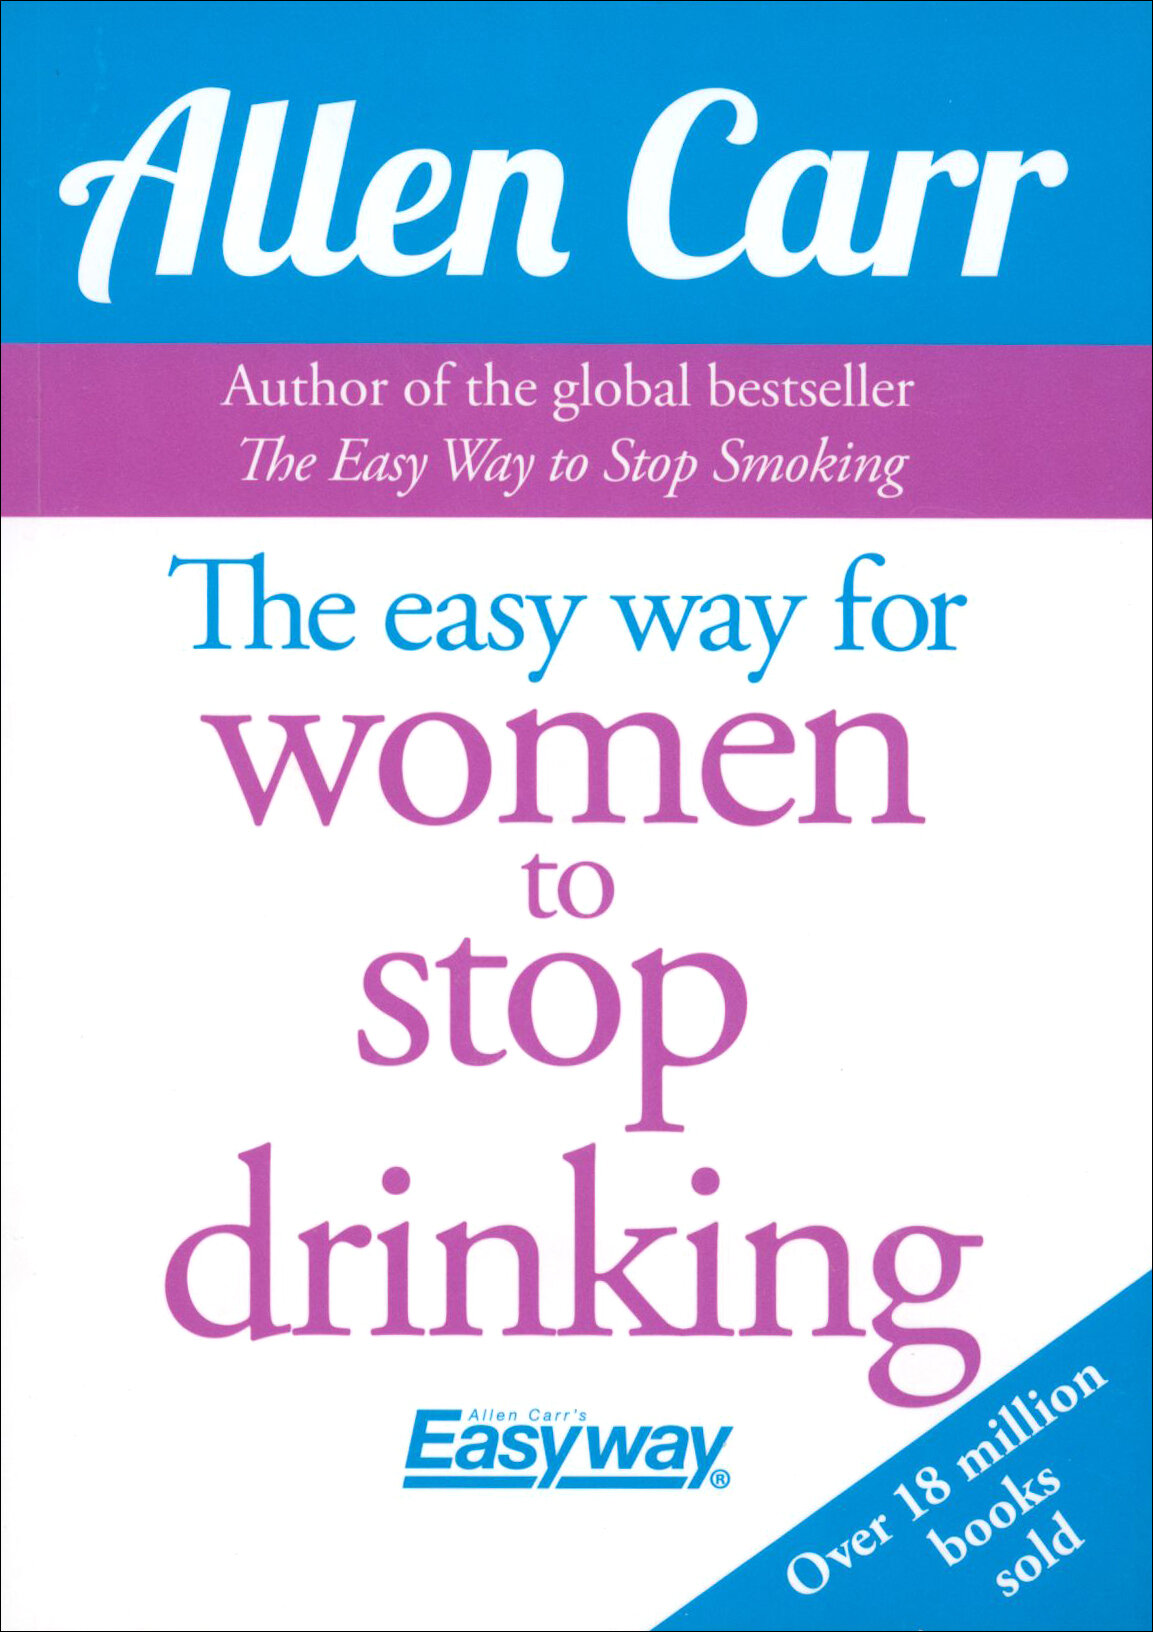 The Easy Way for Women to Stop Drinking / Carr Allen / Книга на Английском / Карр Аллен